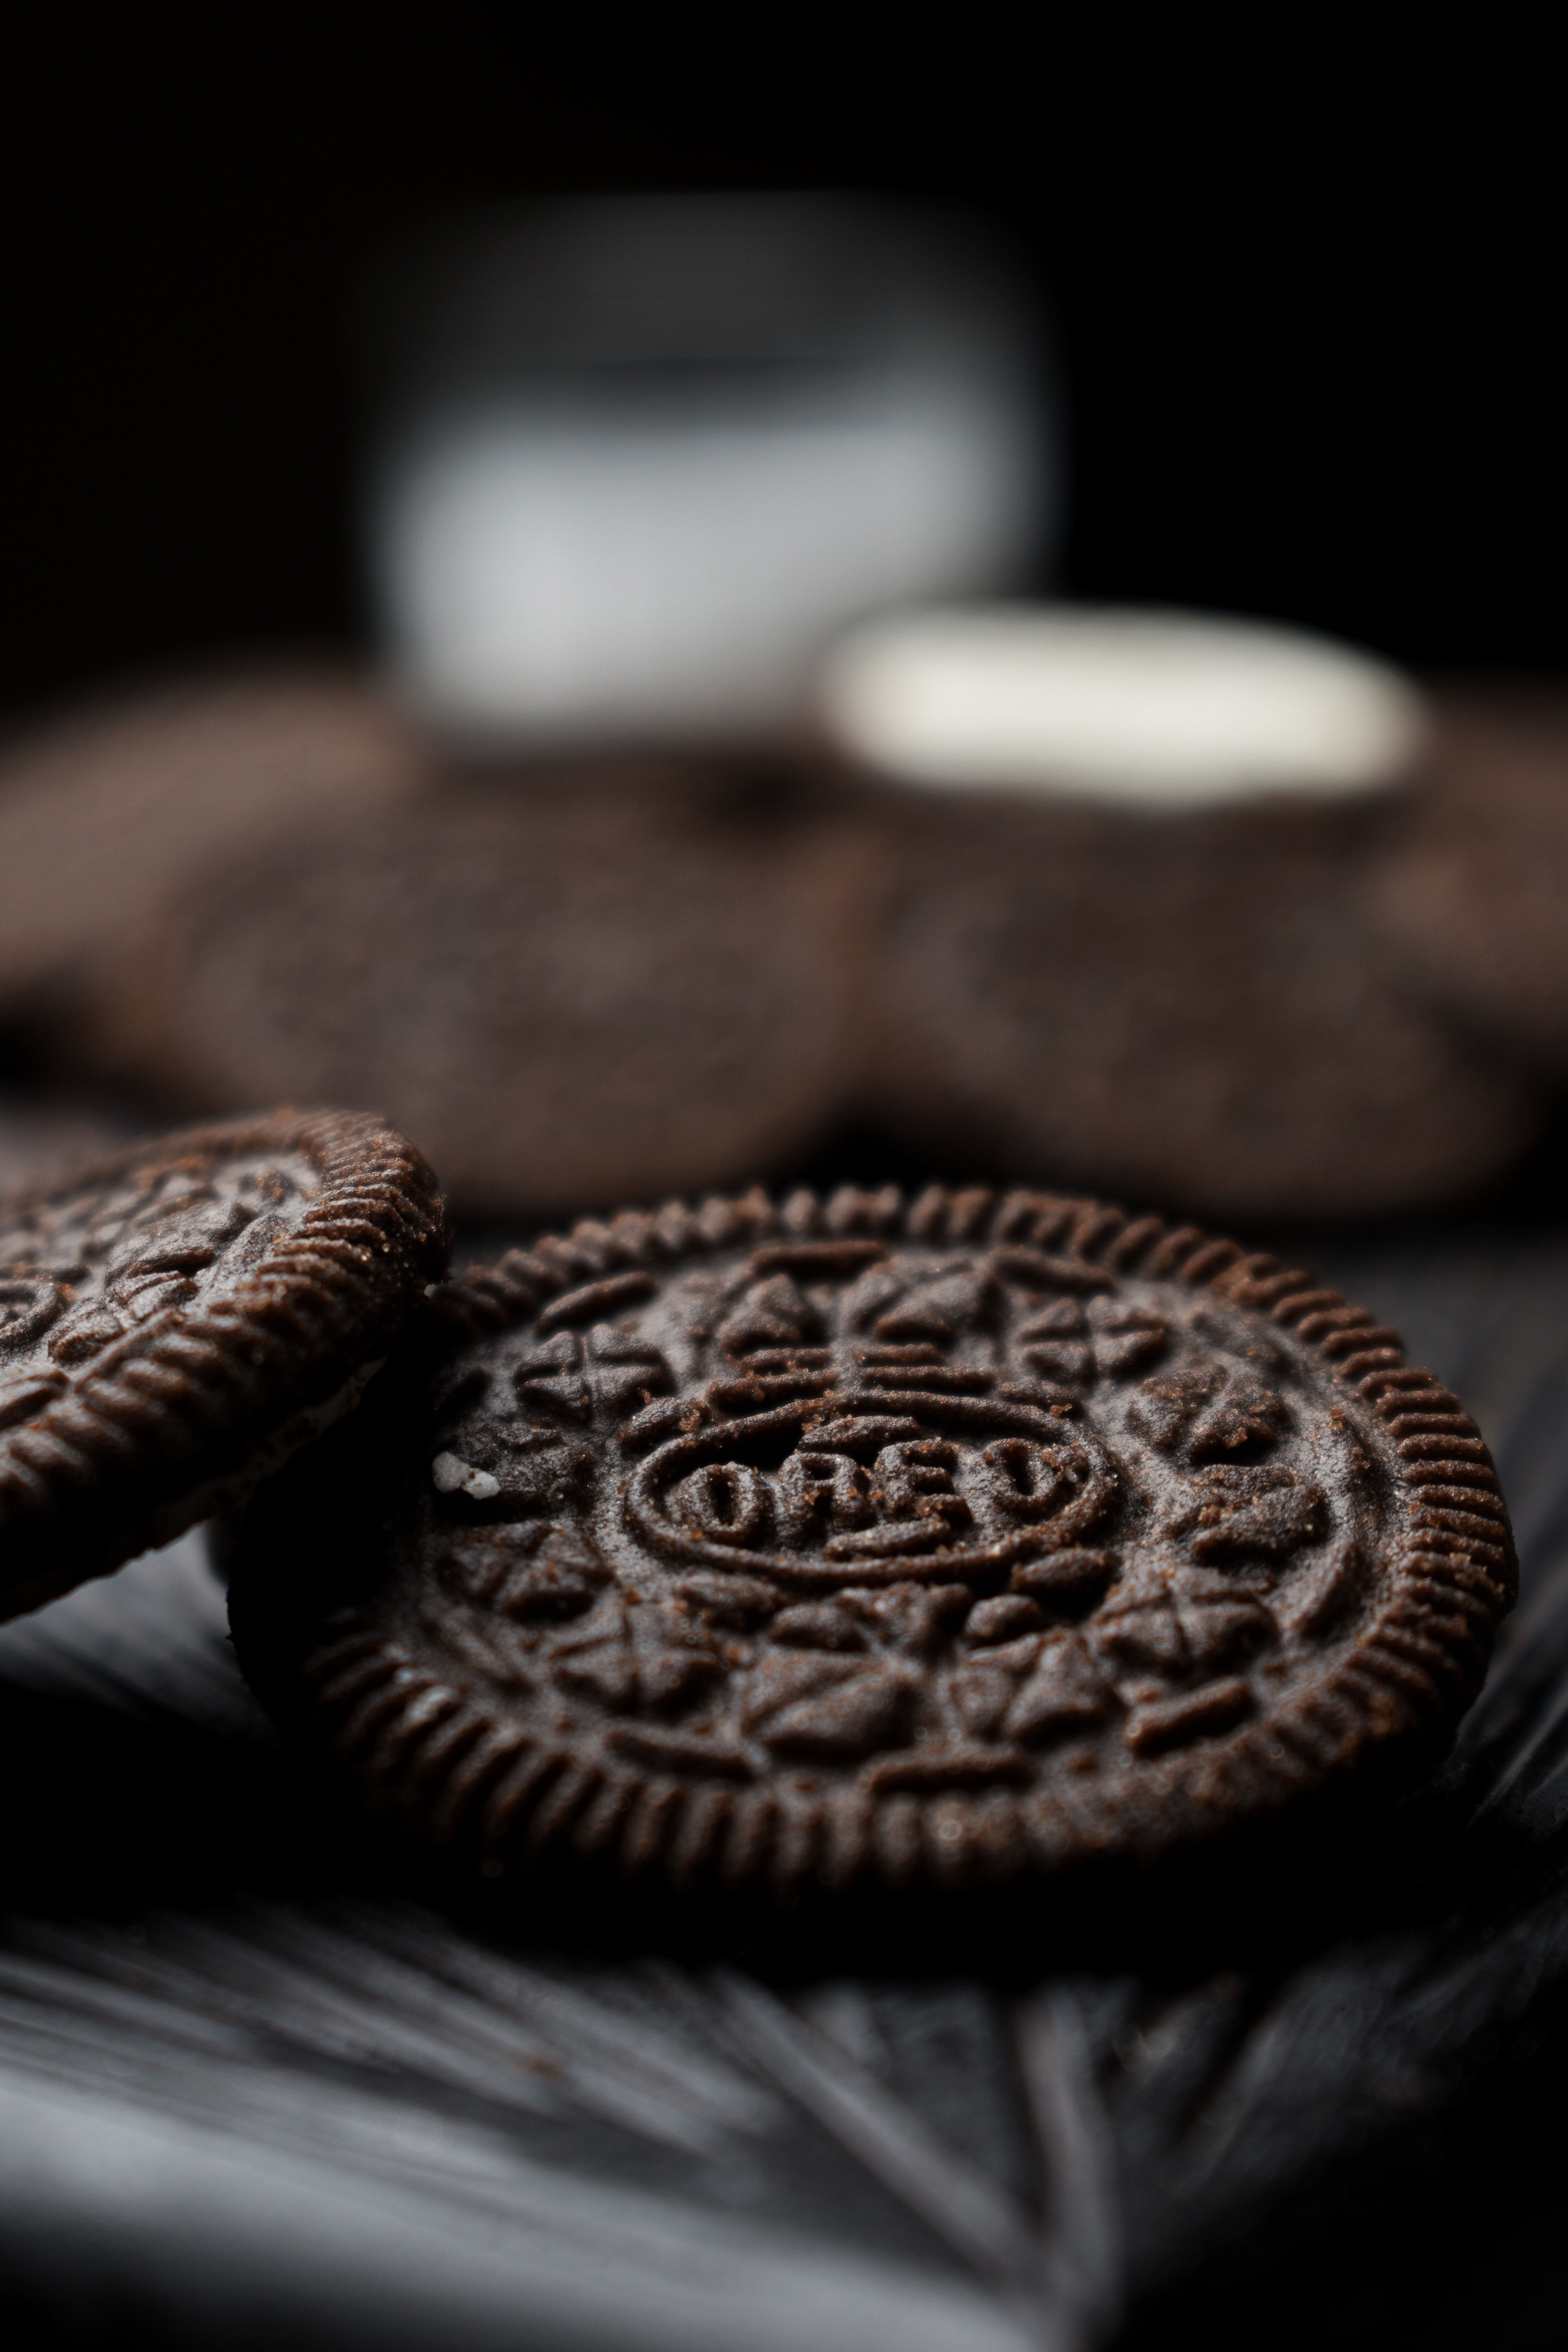 A photograph captures a close-up view of several chocolate Oreo cookies arranged on a black surface. The cookies are placed in a row - Oreo